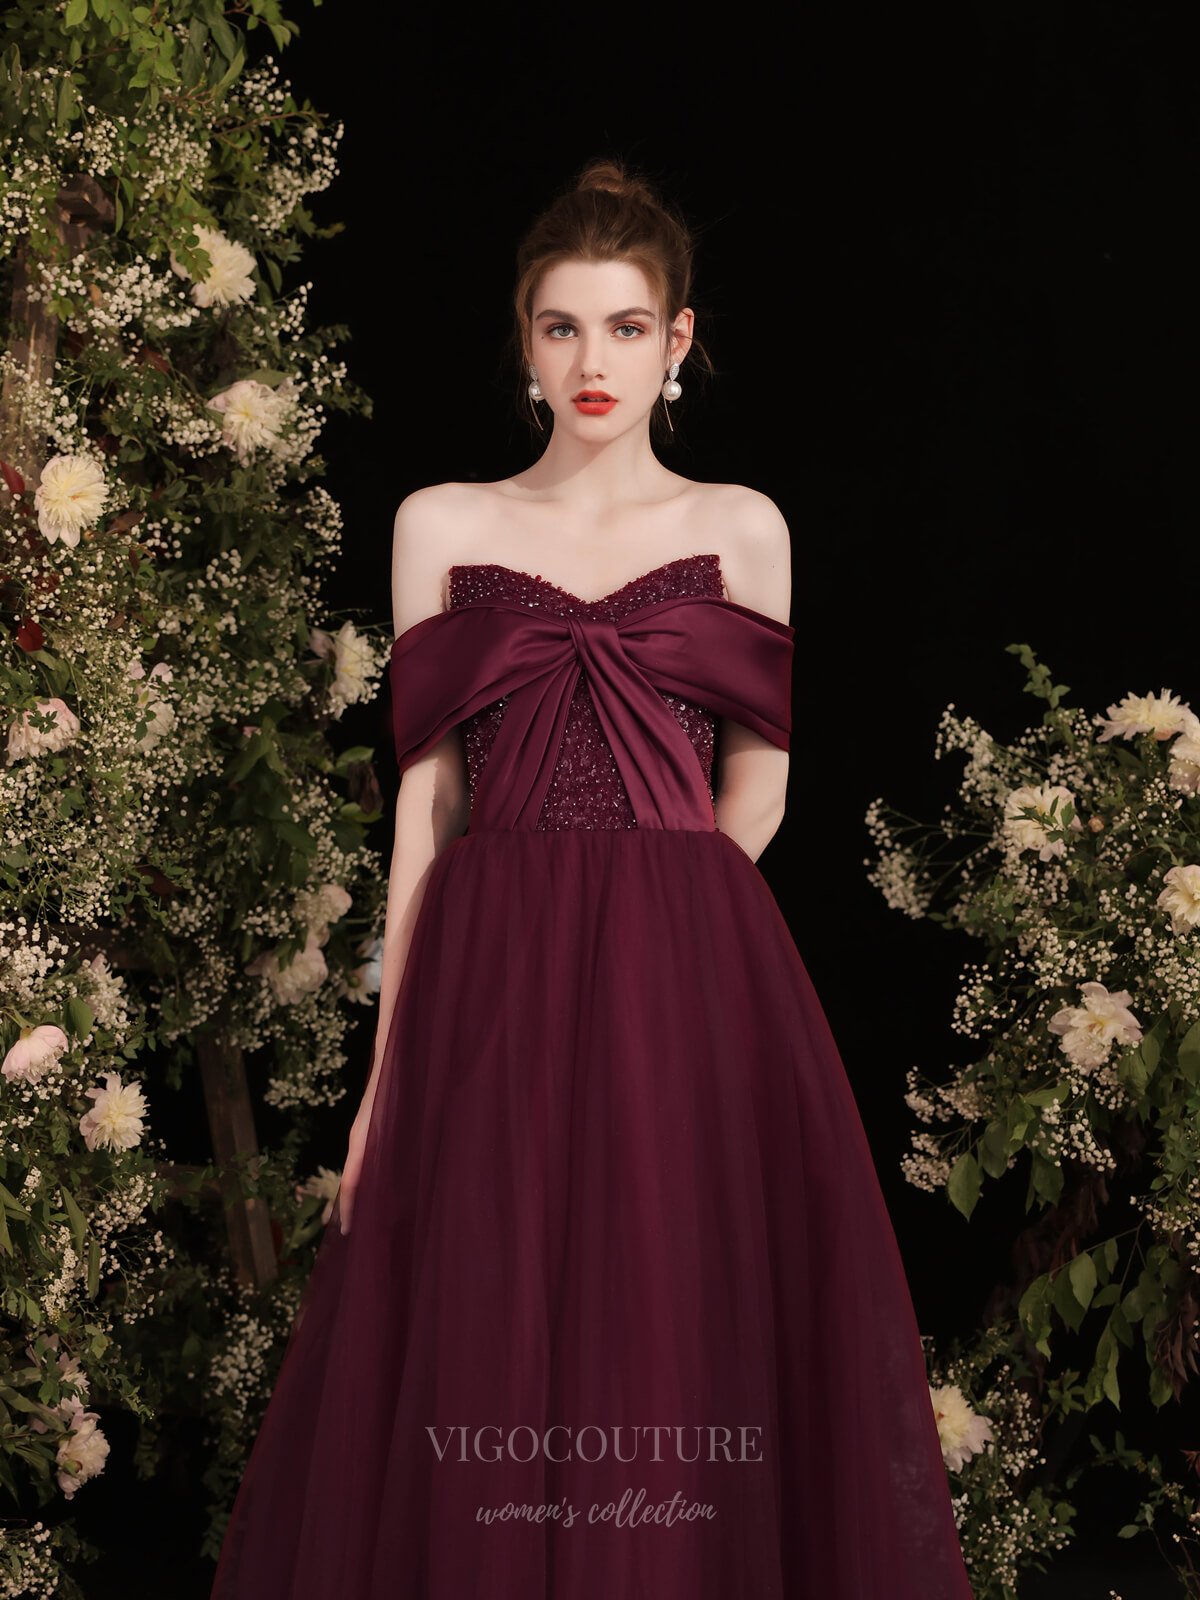 vigocouture-Burgundy Tulle Off the Shoulder Prom Dress 20731-Prom Dresses-vigocouture-